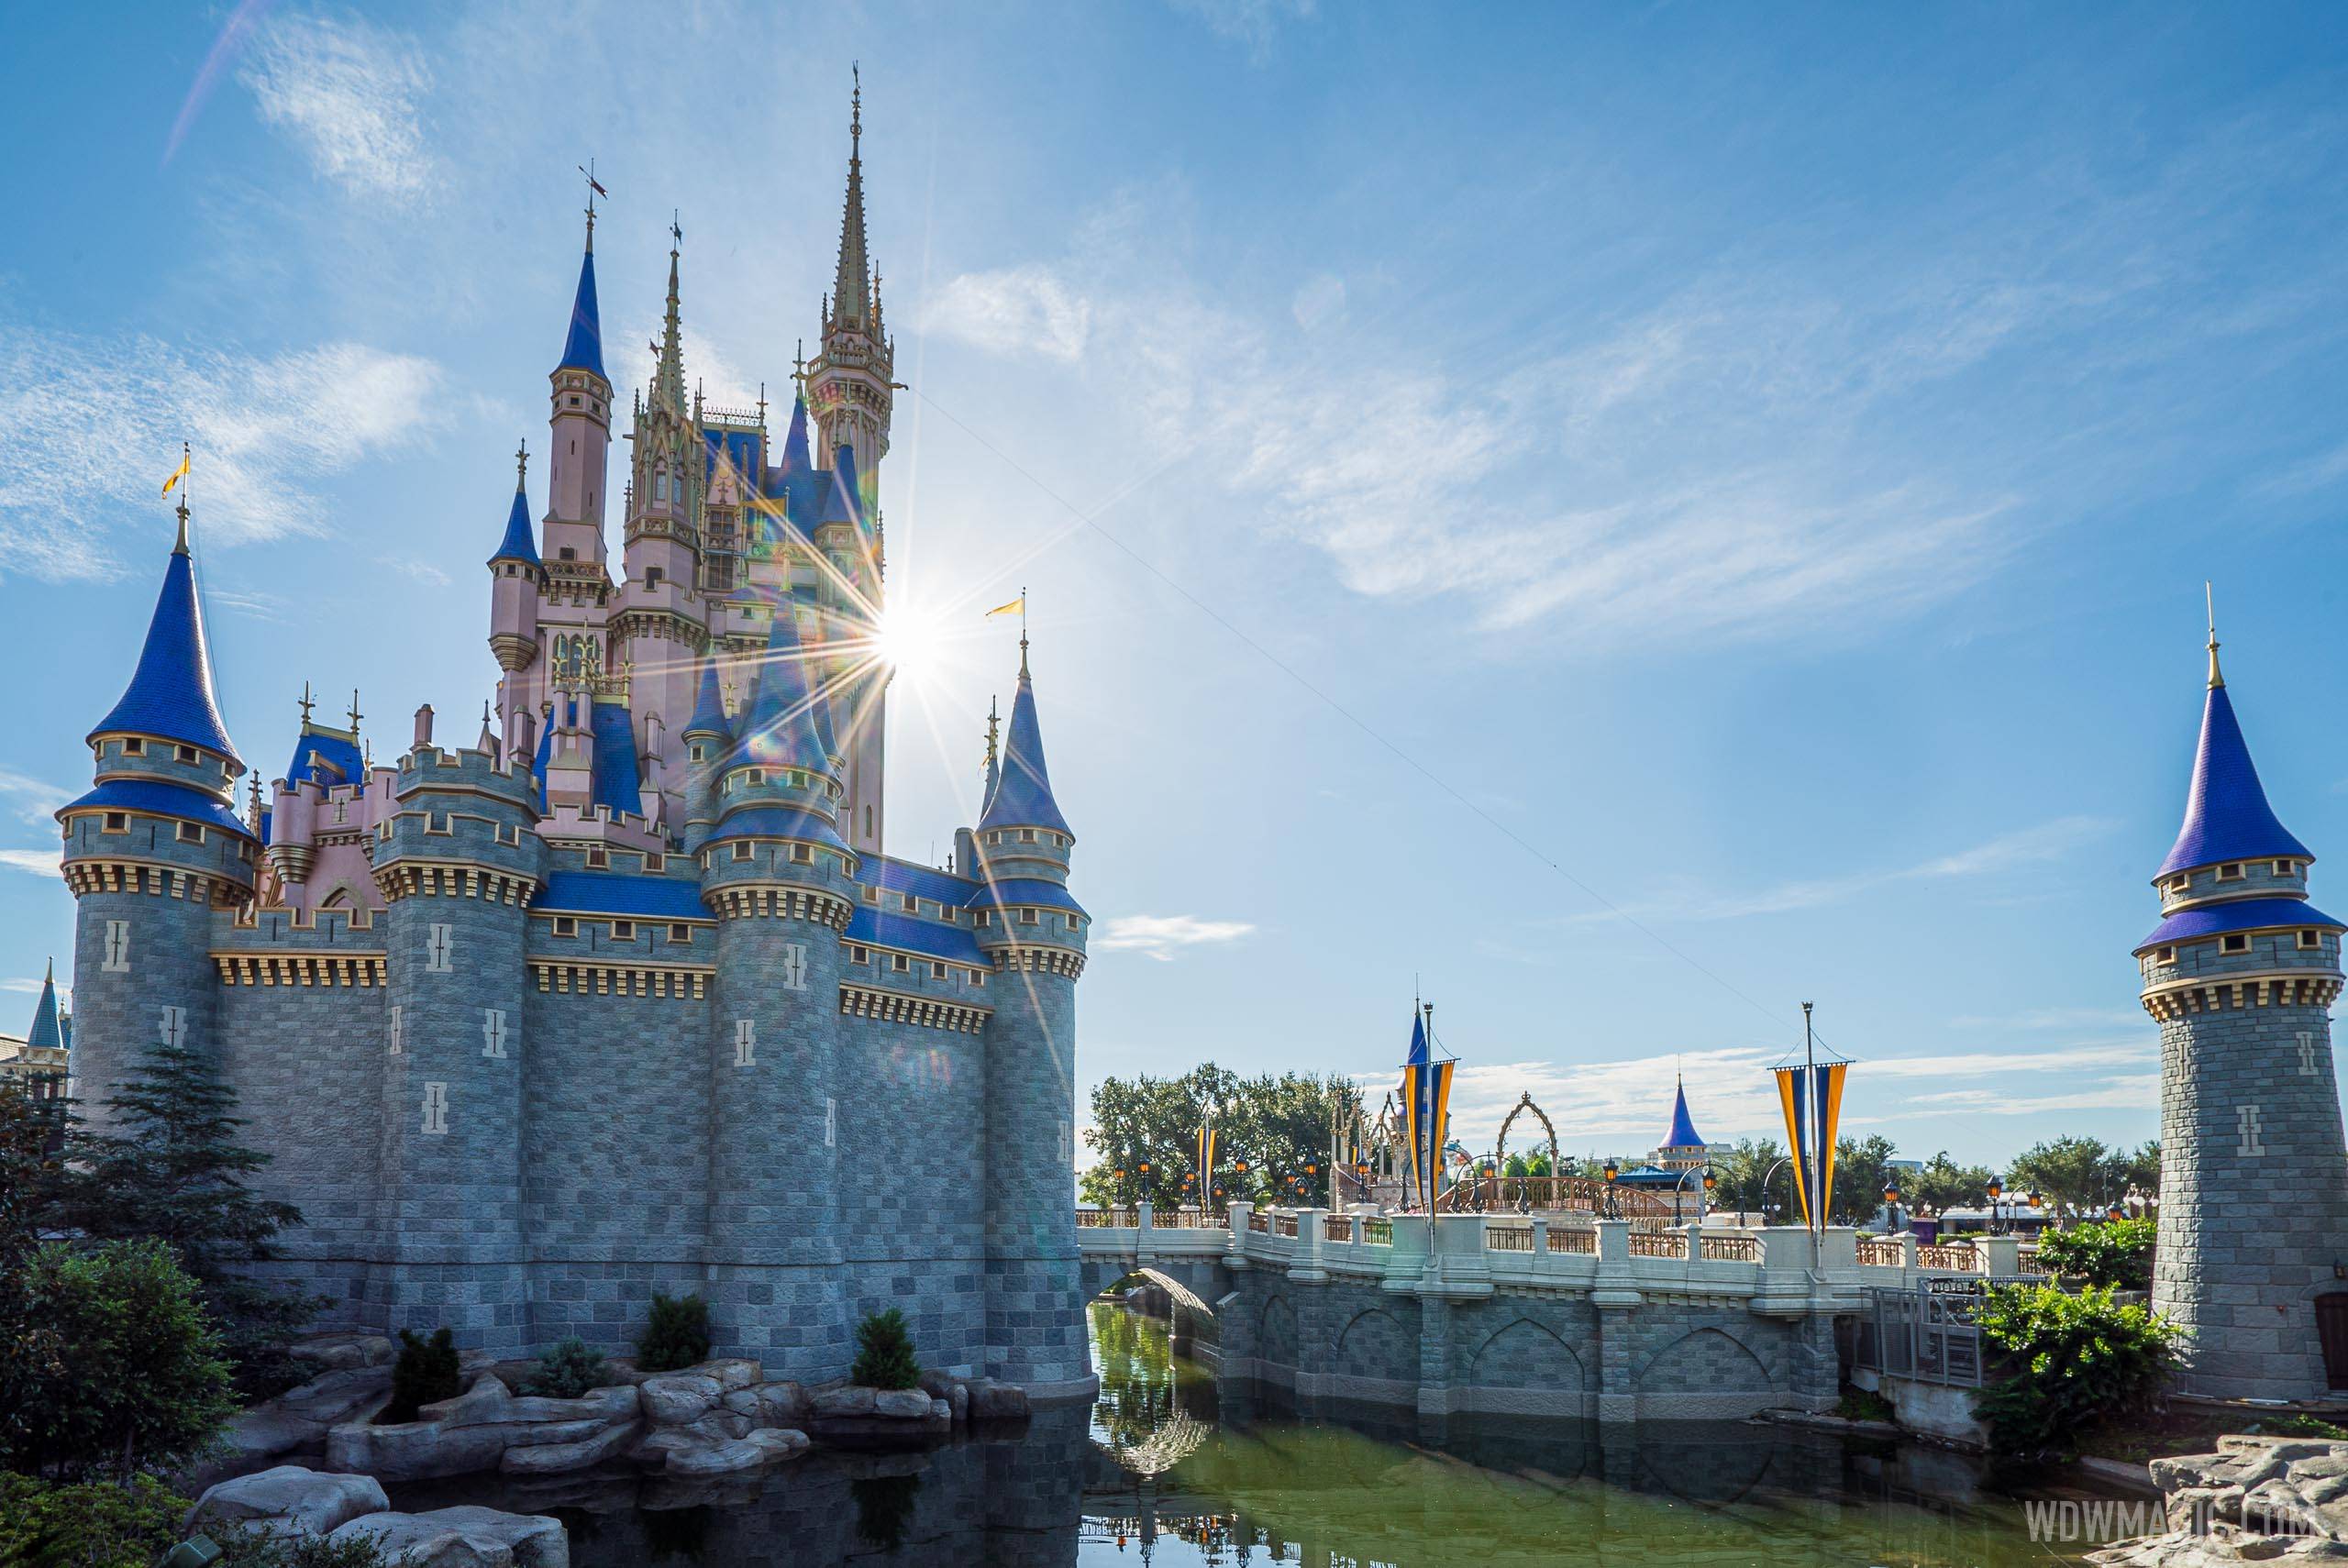 International guests continue to be restricted from travel to Walt Disney World's theme parks.